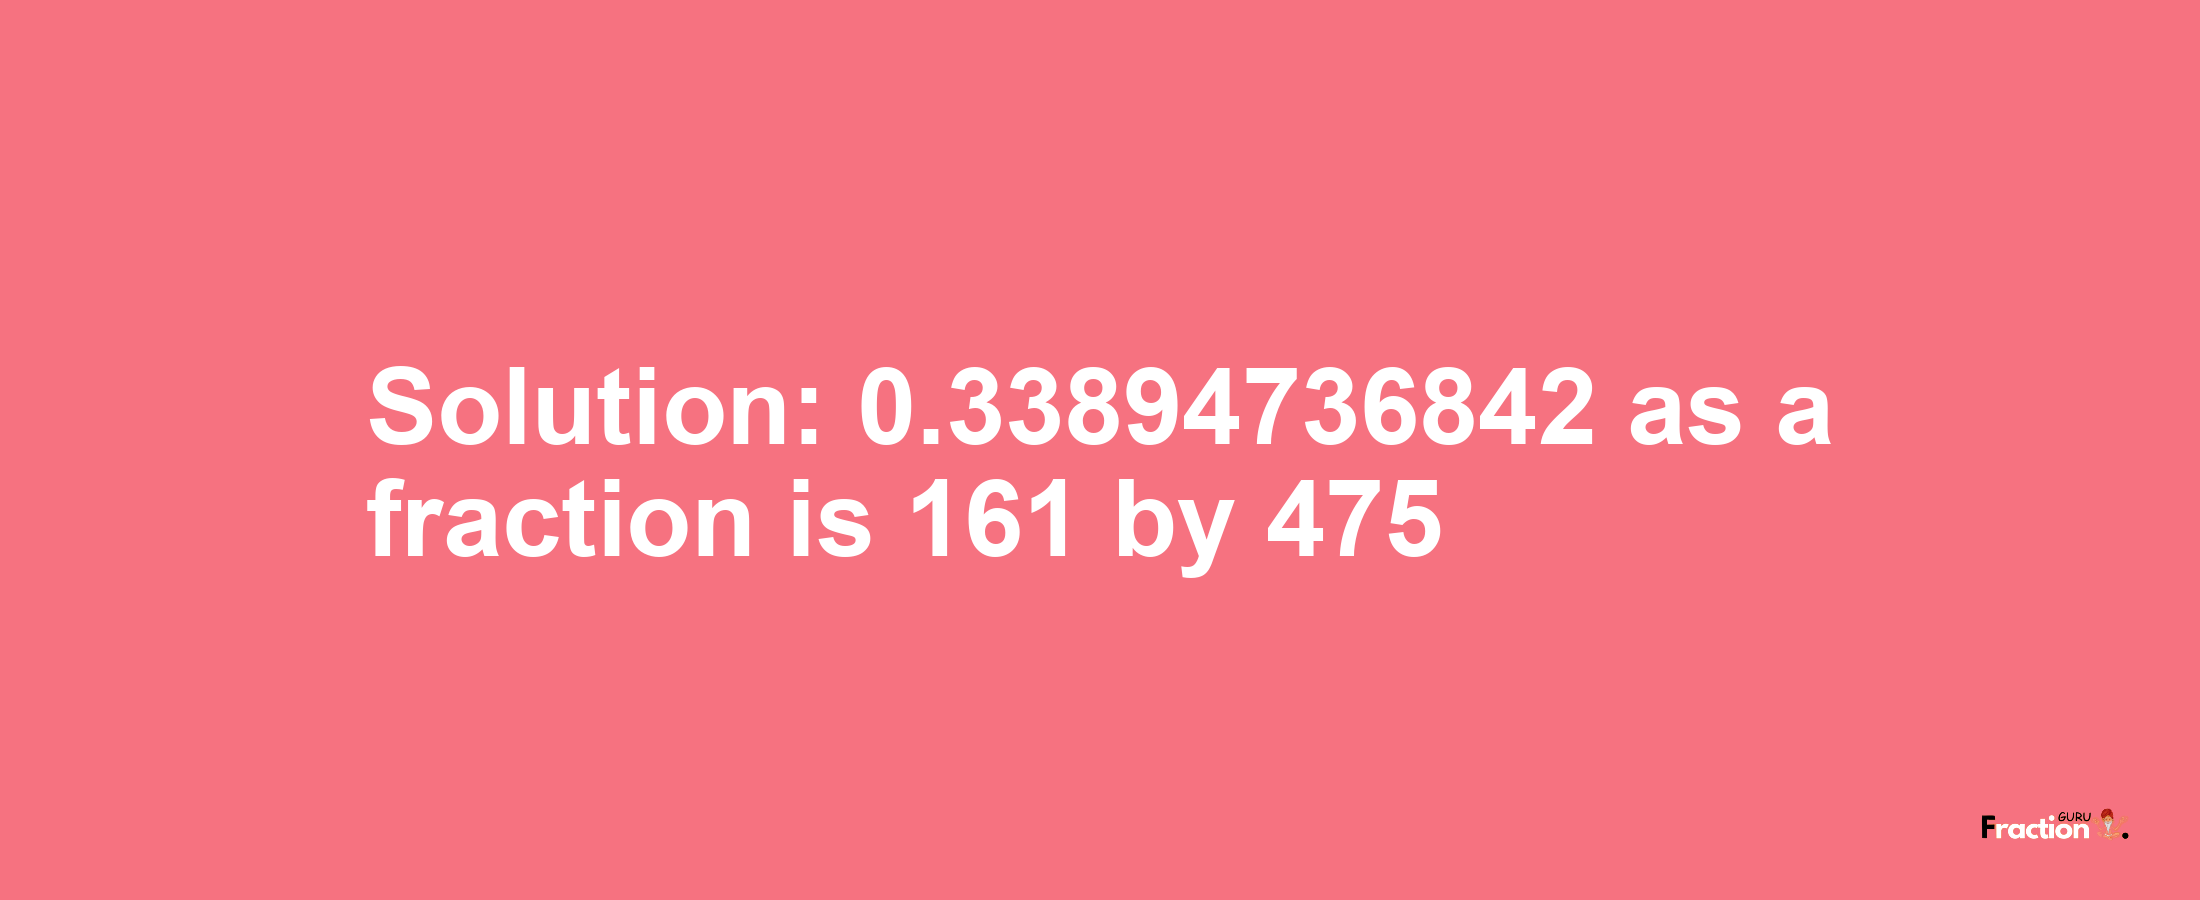 Solution:0.33894736842 as a fraction is 161/475